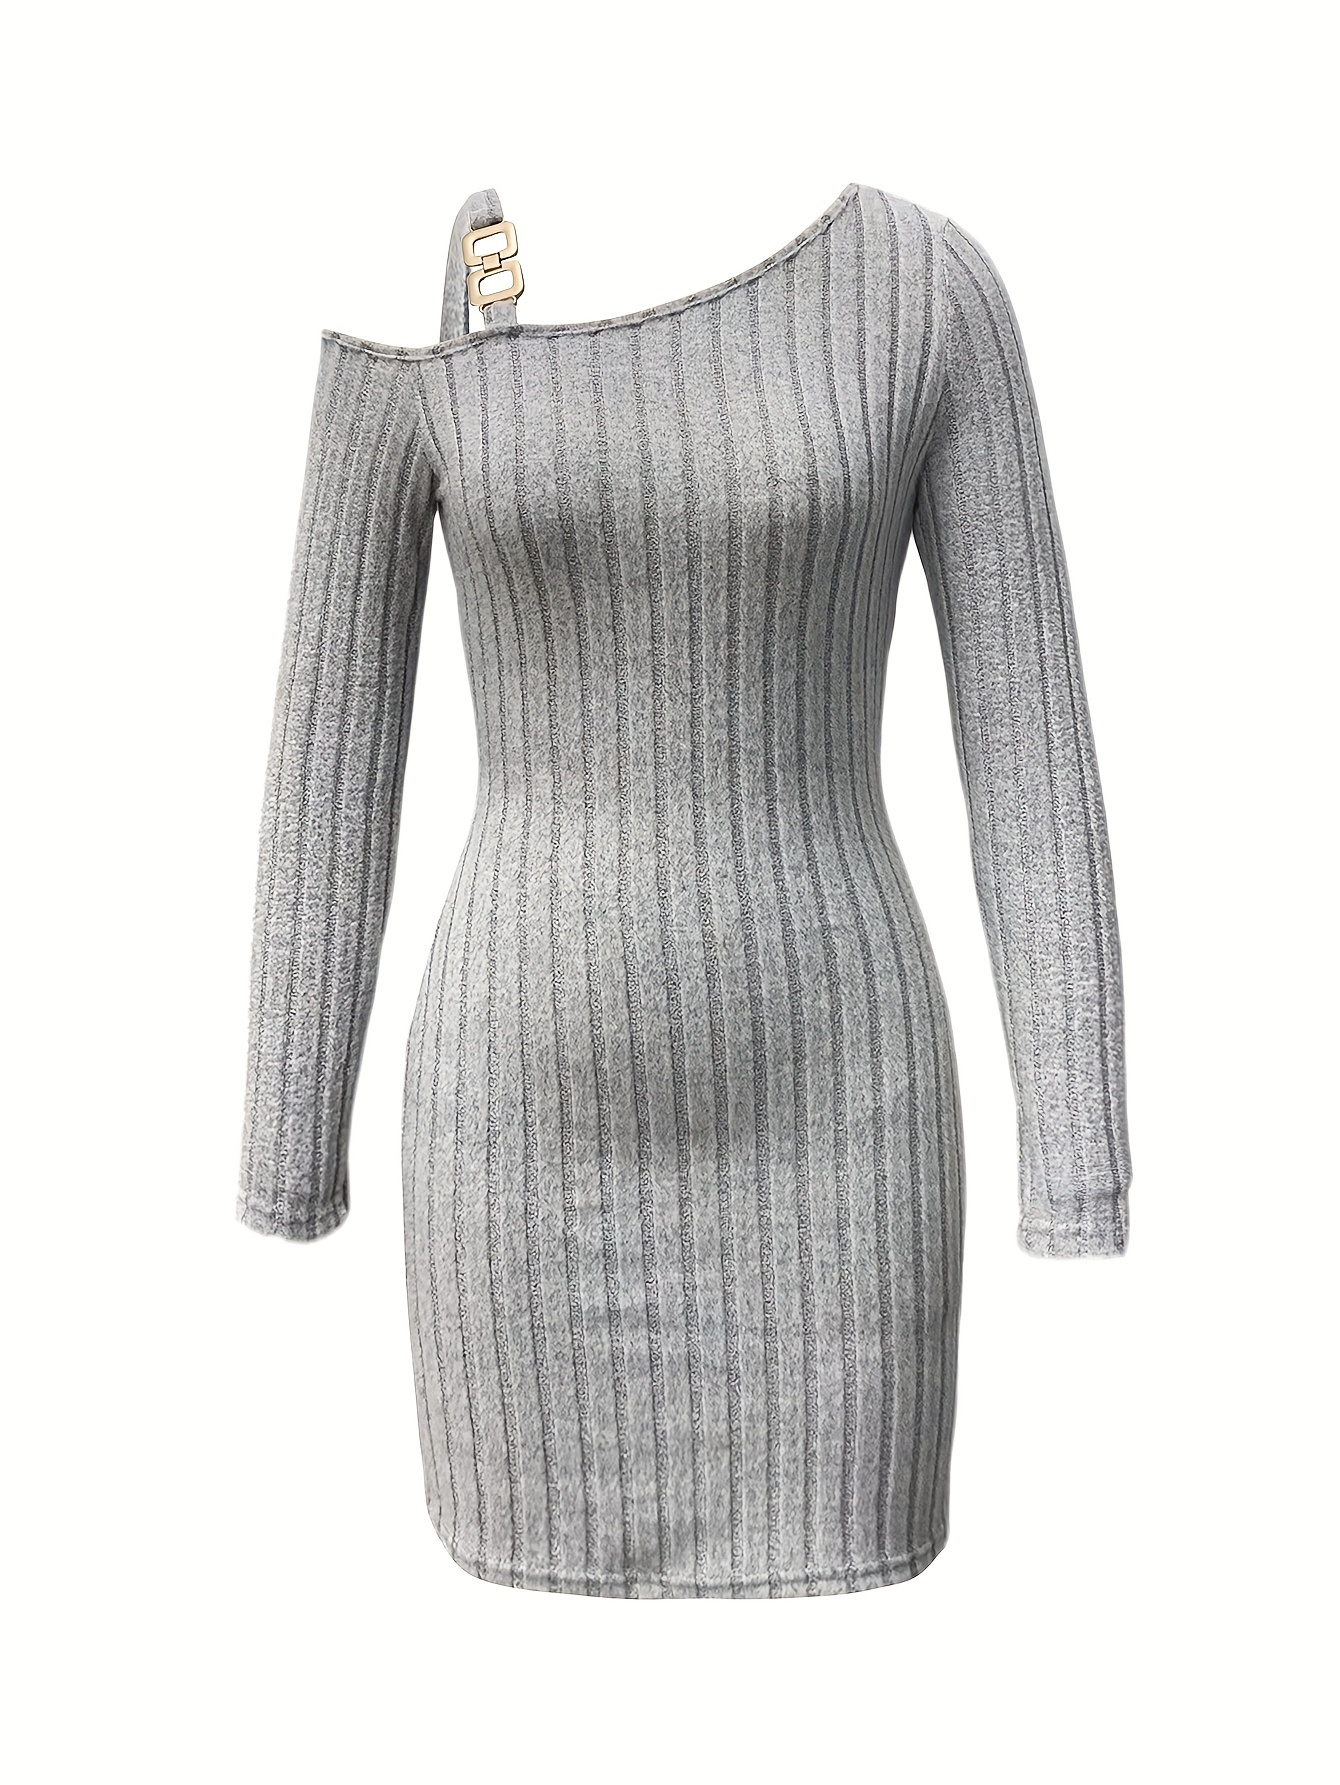 ribbed slanted shoulder dress party wear solid long sleeve mini dress womens clothing details 1